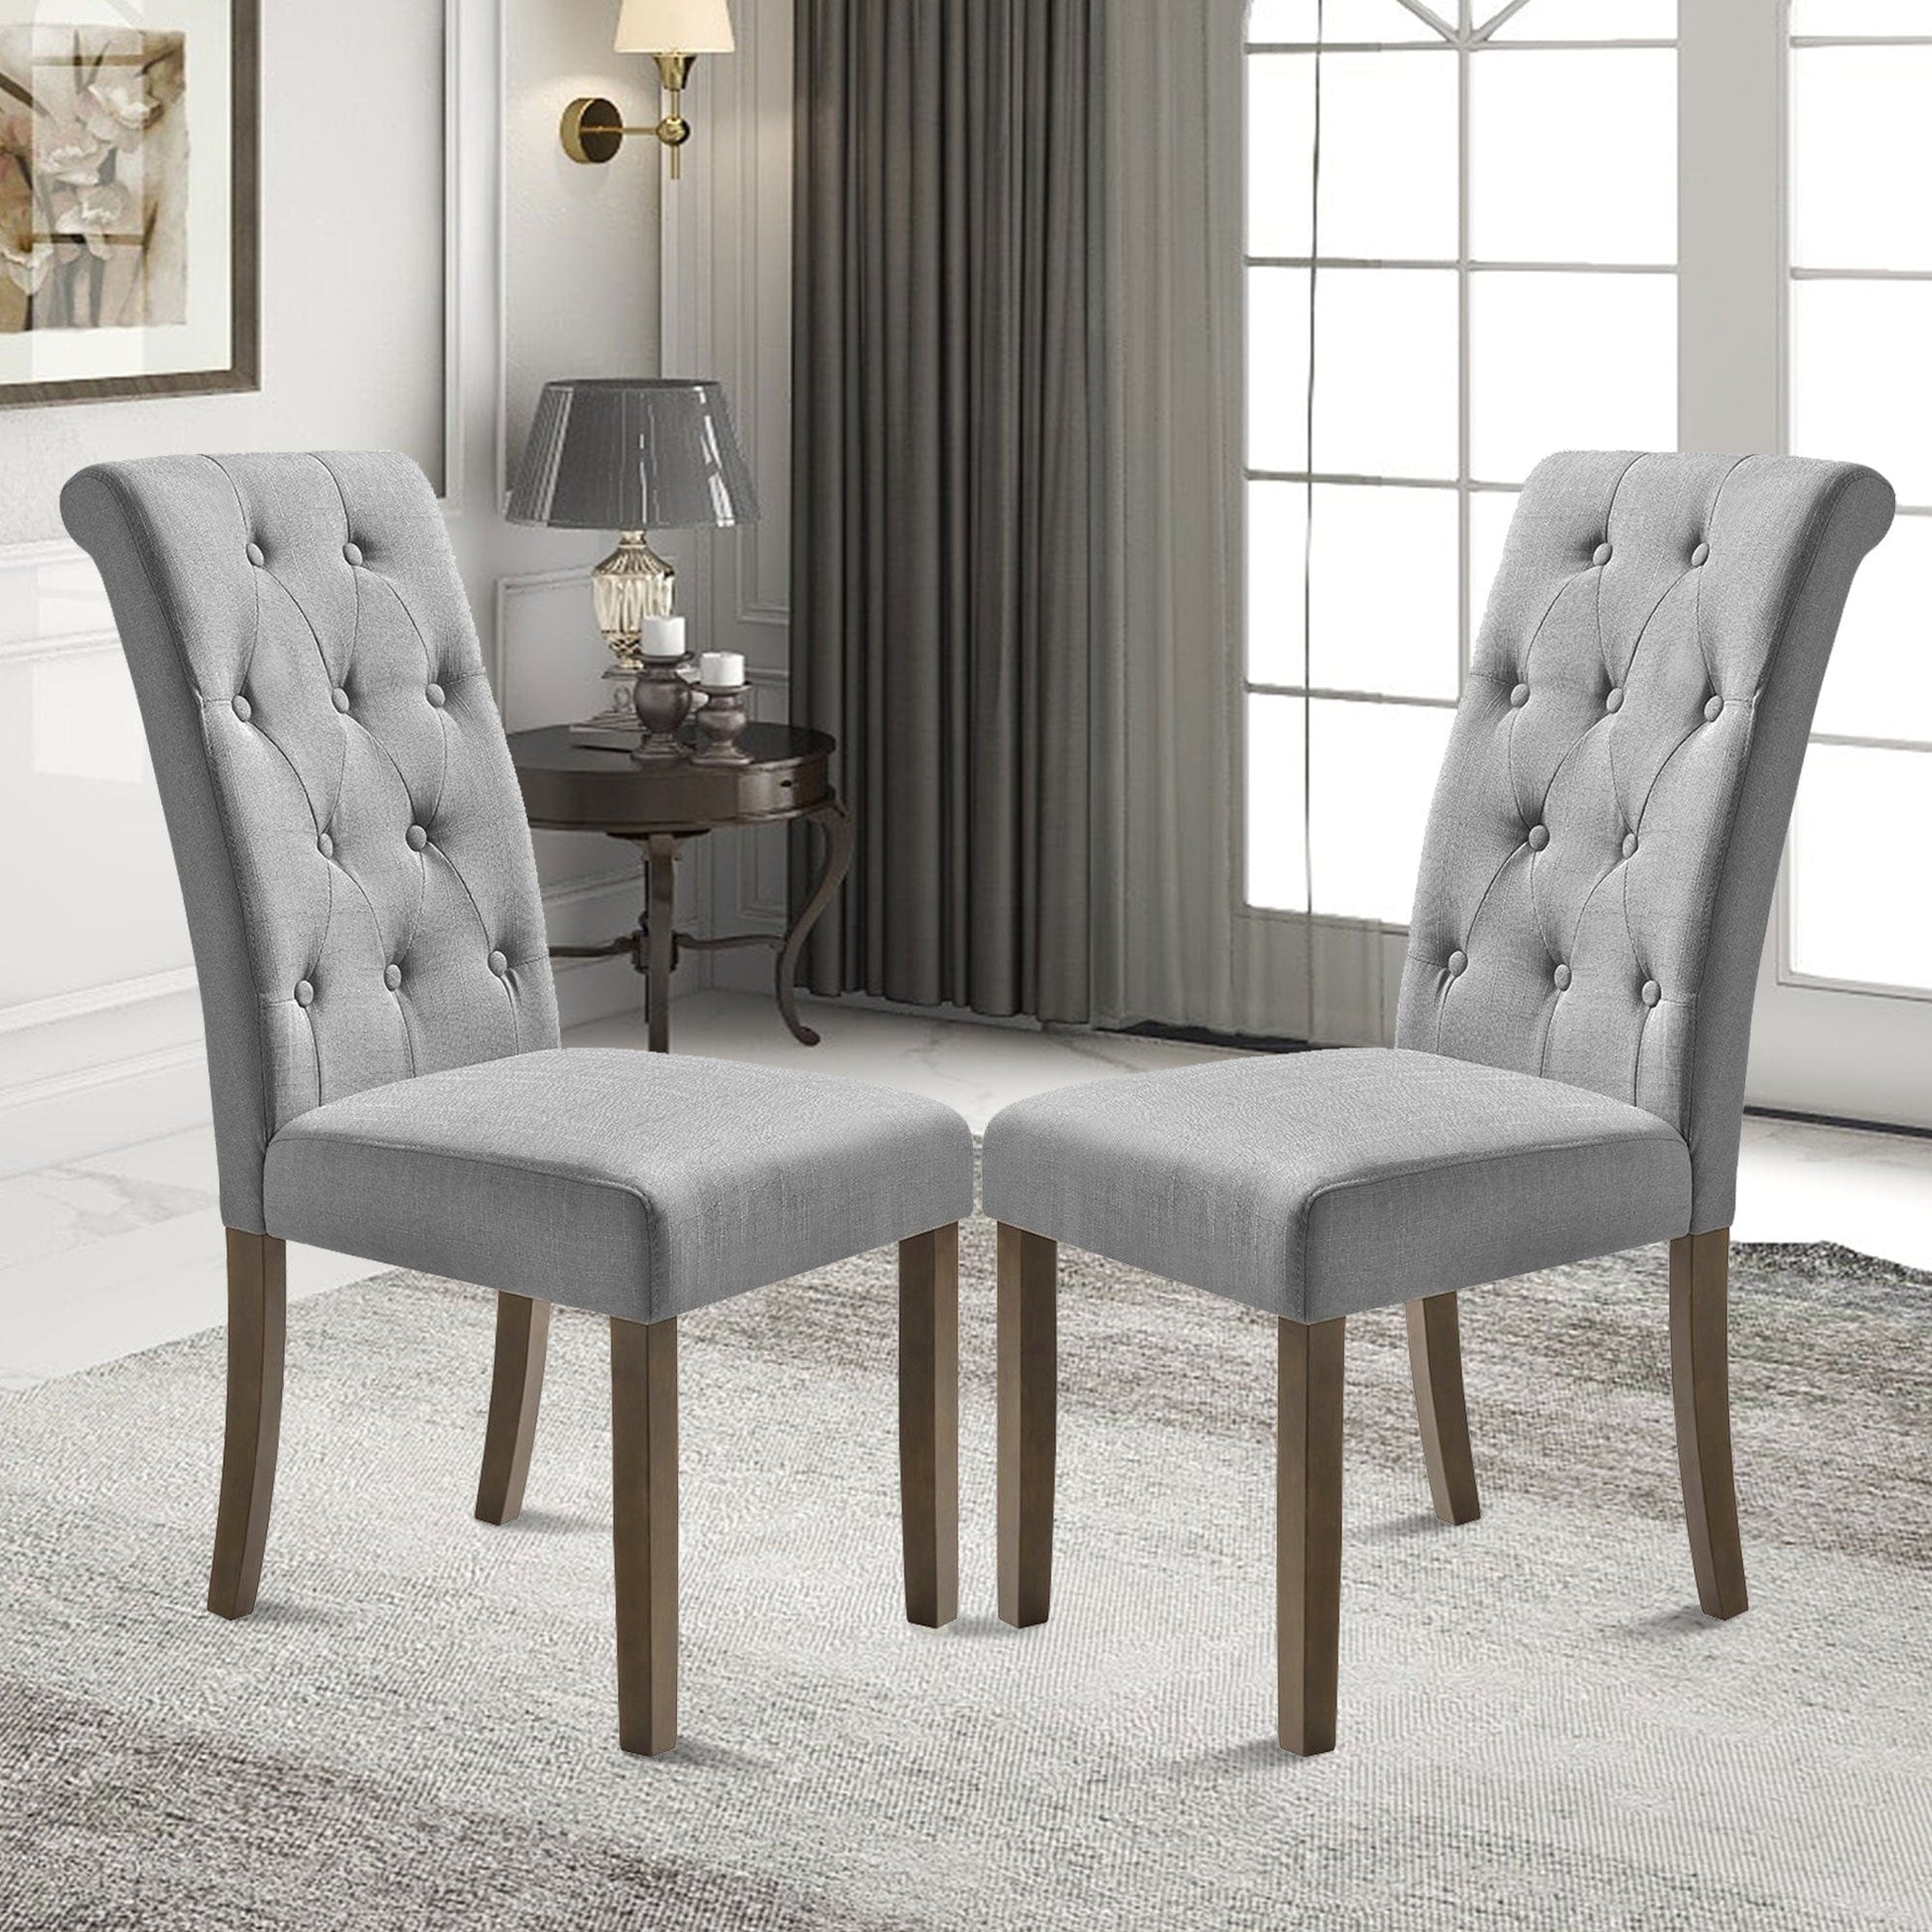 1st Choice Furniture Direct Dining Chairs 1st Choice Modern Aristocratic Tufted Dining Chair Room Set (Set of 2)